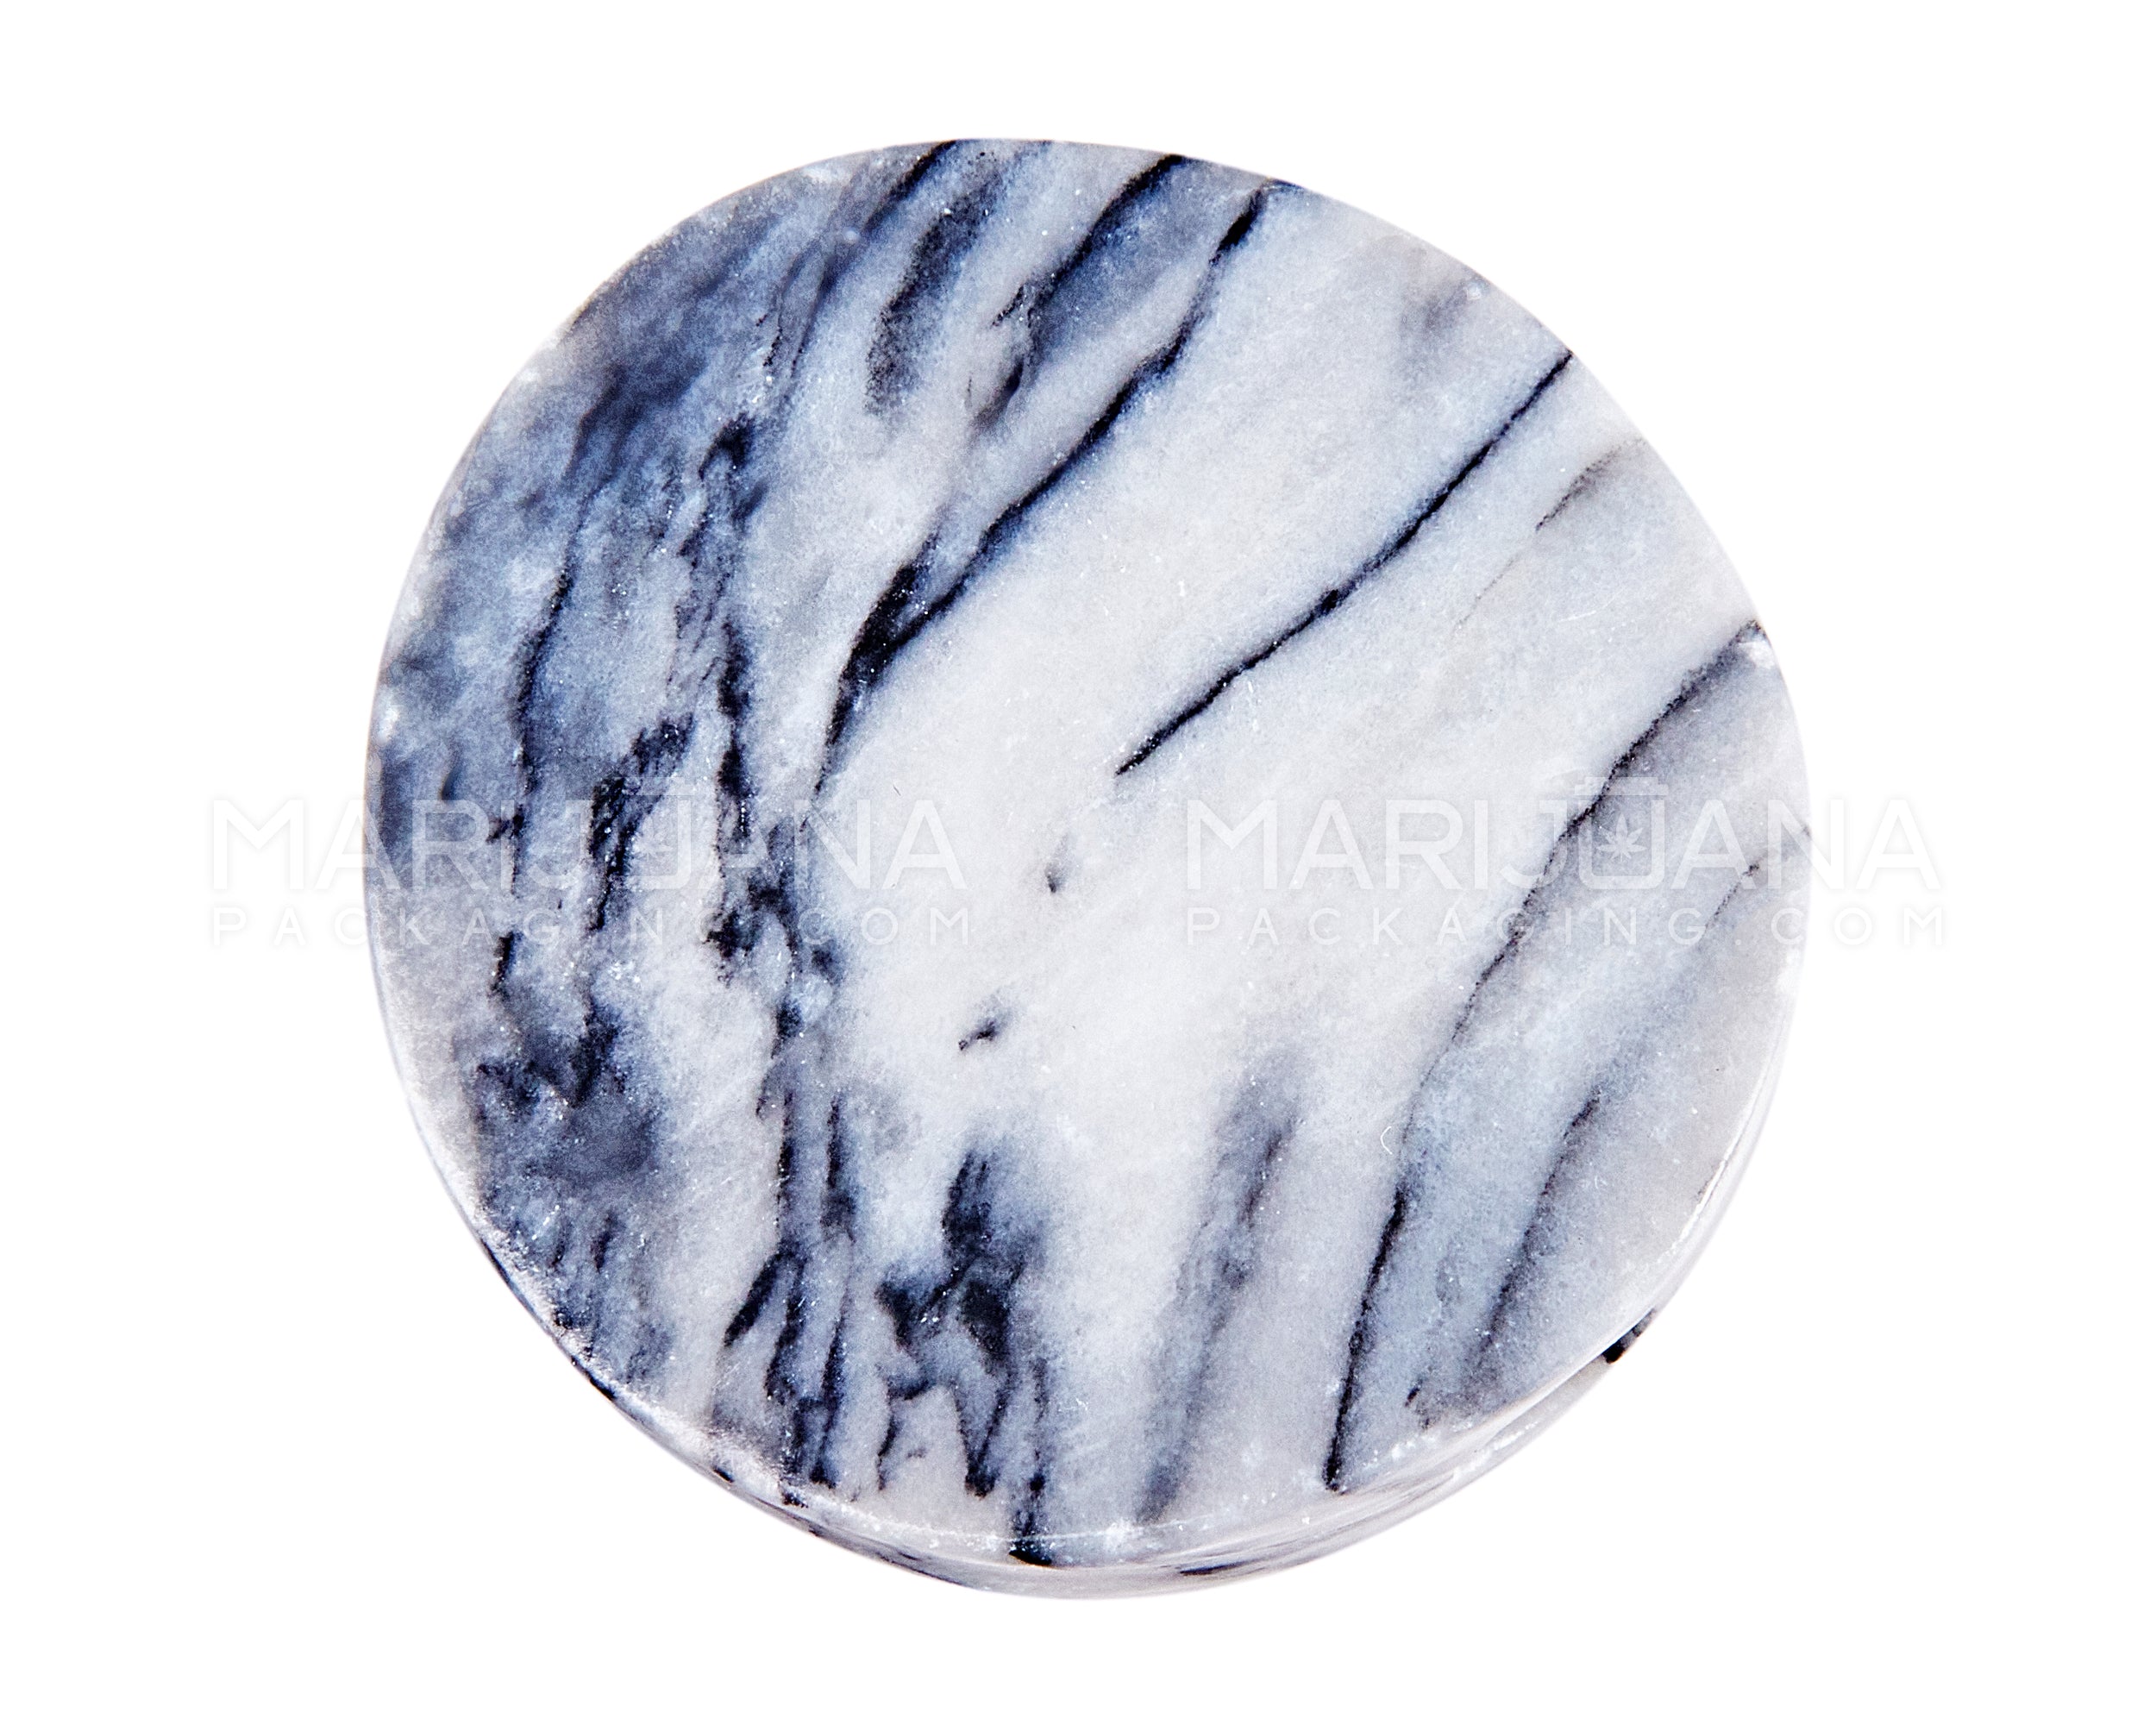 Marble Smoking Stone Joint Holder | Assorted - 1.5in Diameter - 8